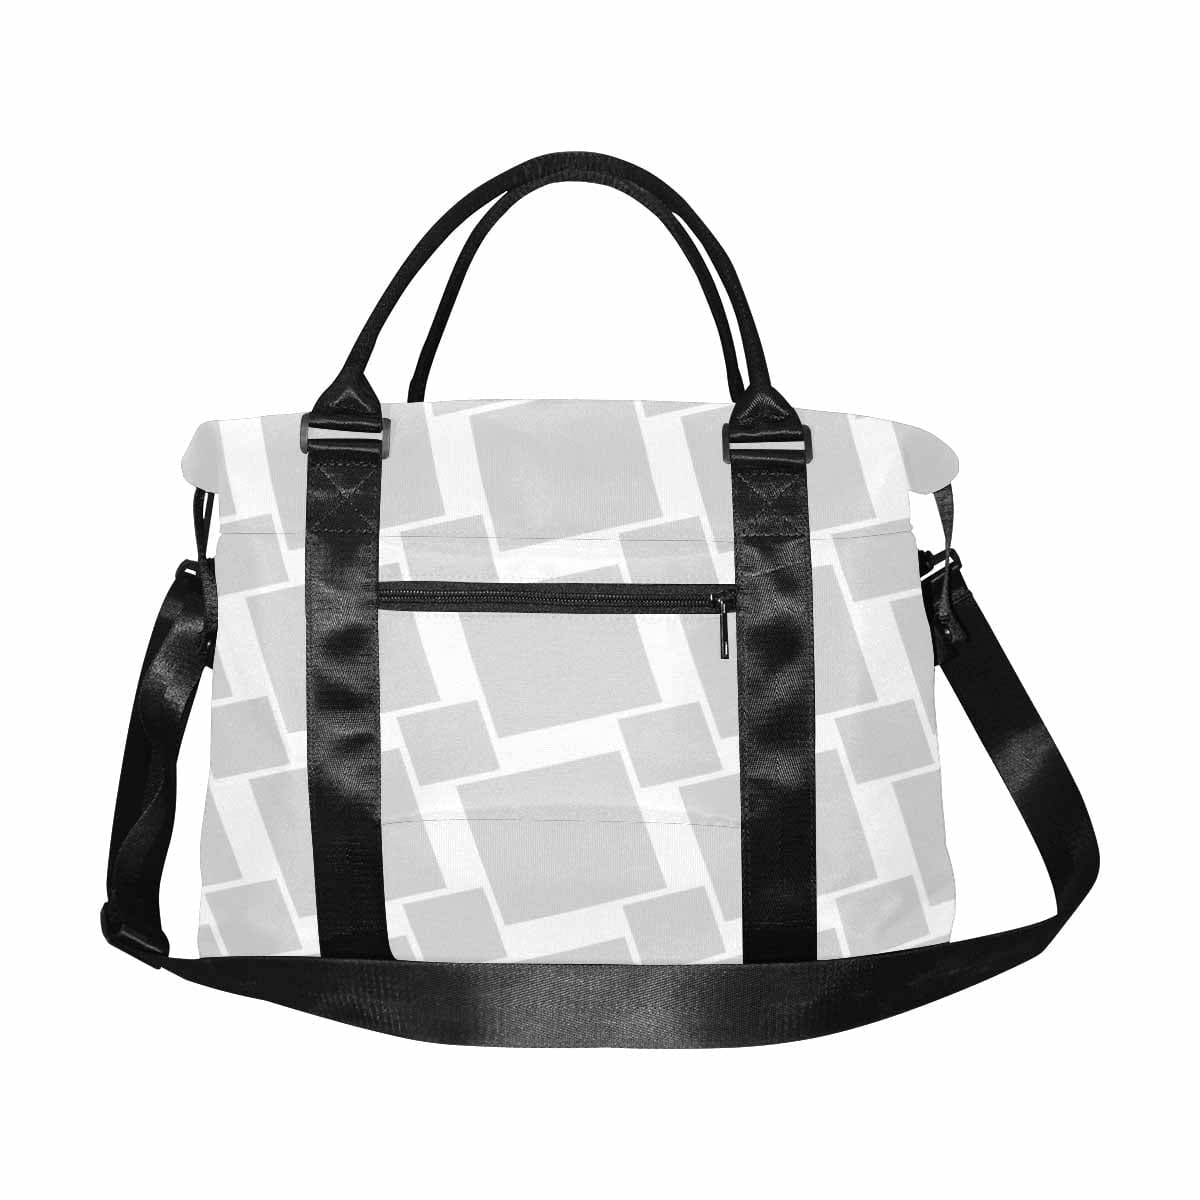 Duffle Bag - Large Capacity - Light Grey - Bags | Travel Bags | Canvas Carry